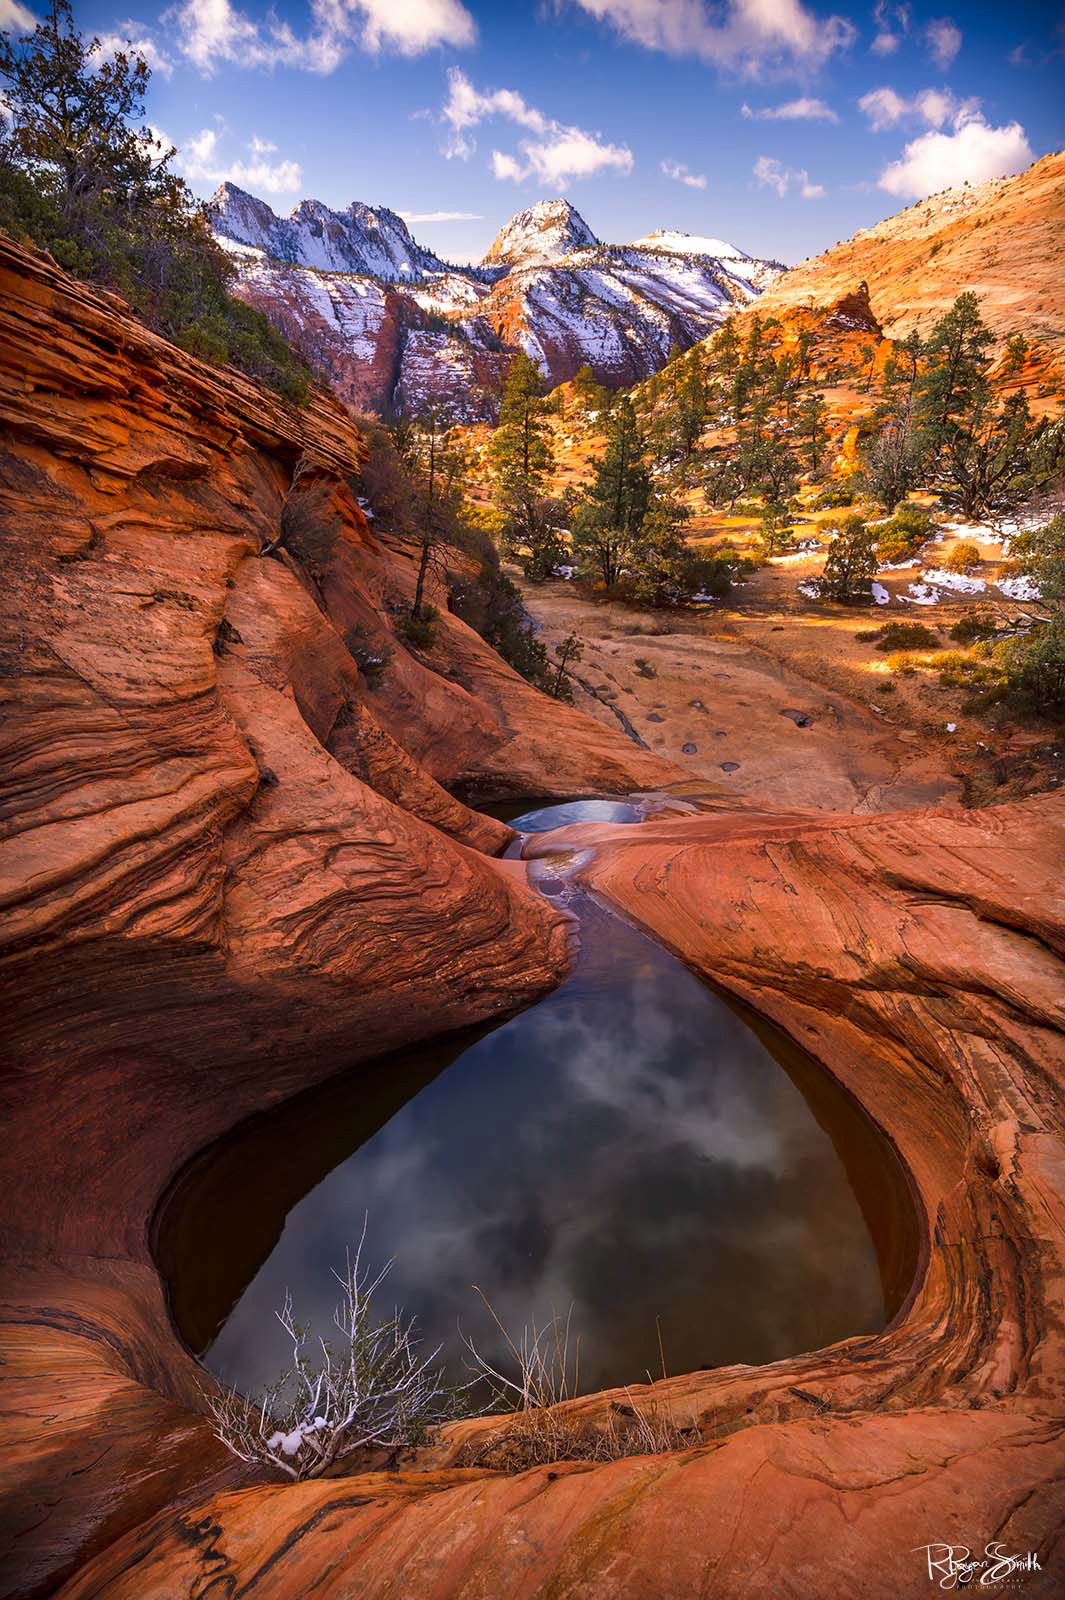 Snowy mountains under clouds in a blue sky while the sun lights up the hillside as new life grows and a reflection pool surrounded by red rock mirrors the sky.